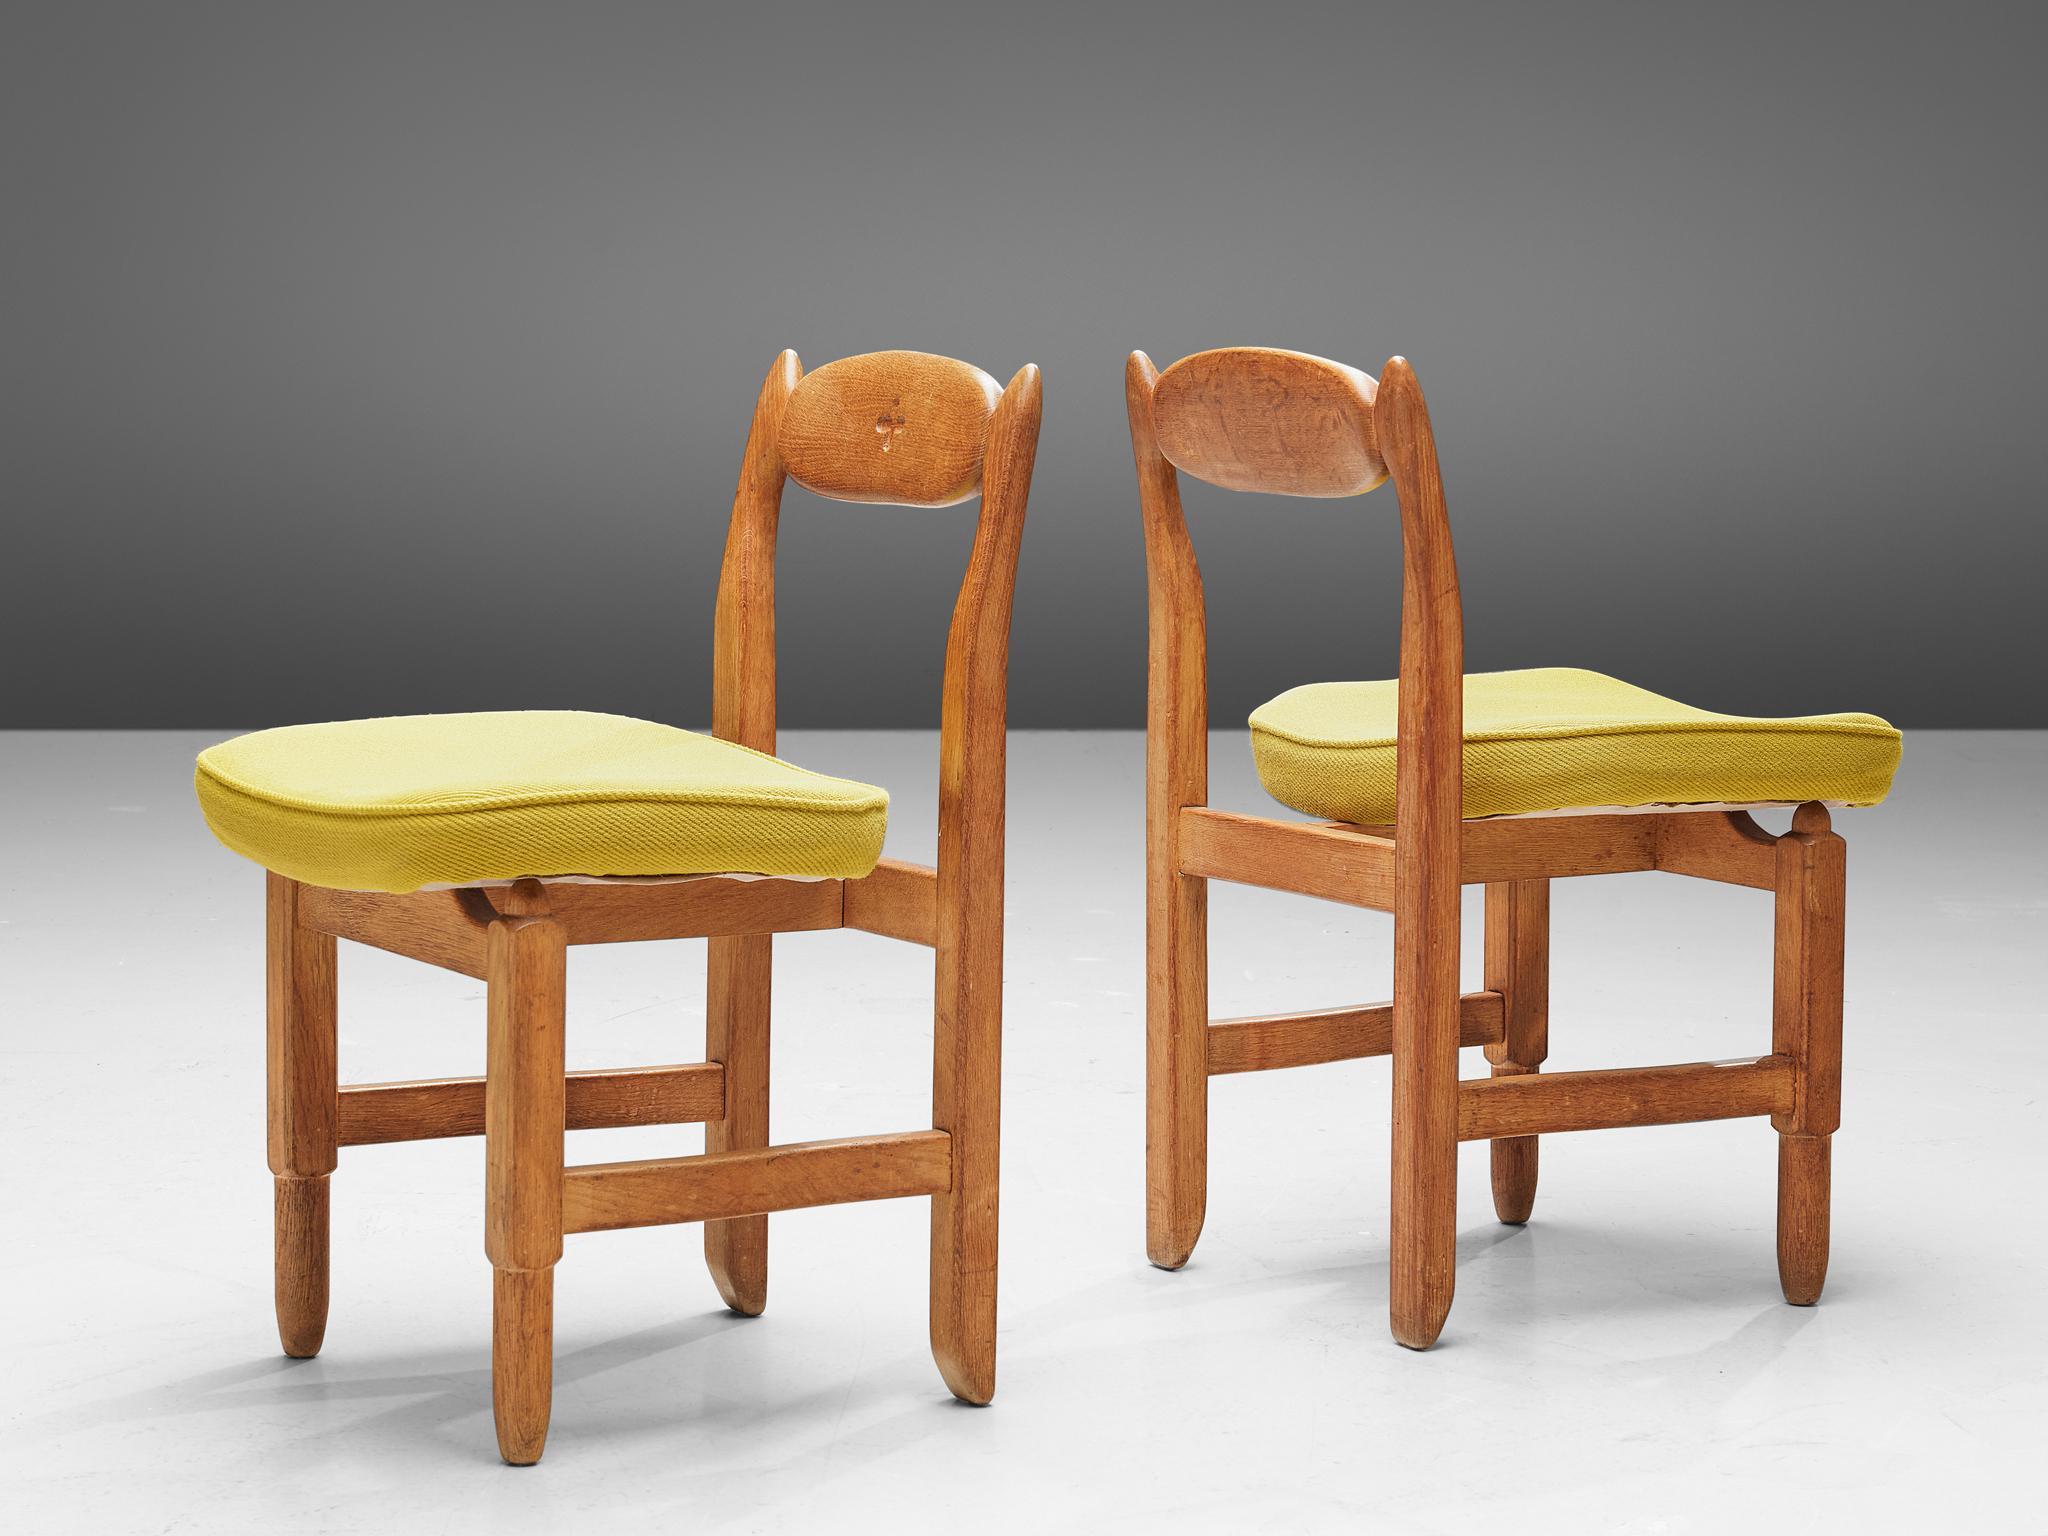 Guillerme et Chambron, dining chairs, fabric, solid oak, France, 1960s

These distinctive chairs in oak are designed by the French designer duo Jacques Chambron and Robert Guillerme. This dining chair shows organic and robust lines. Starting with